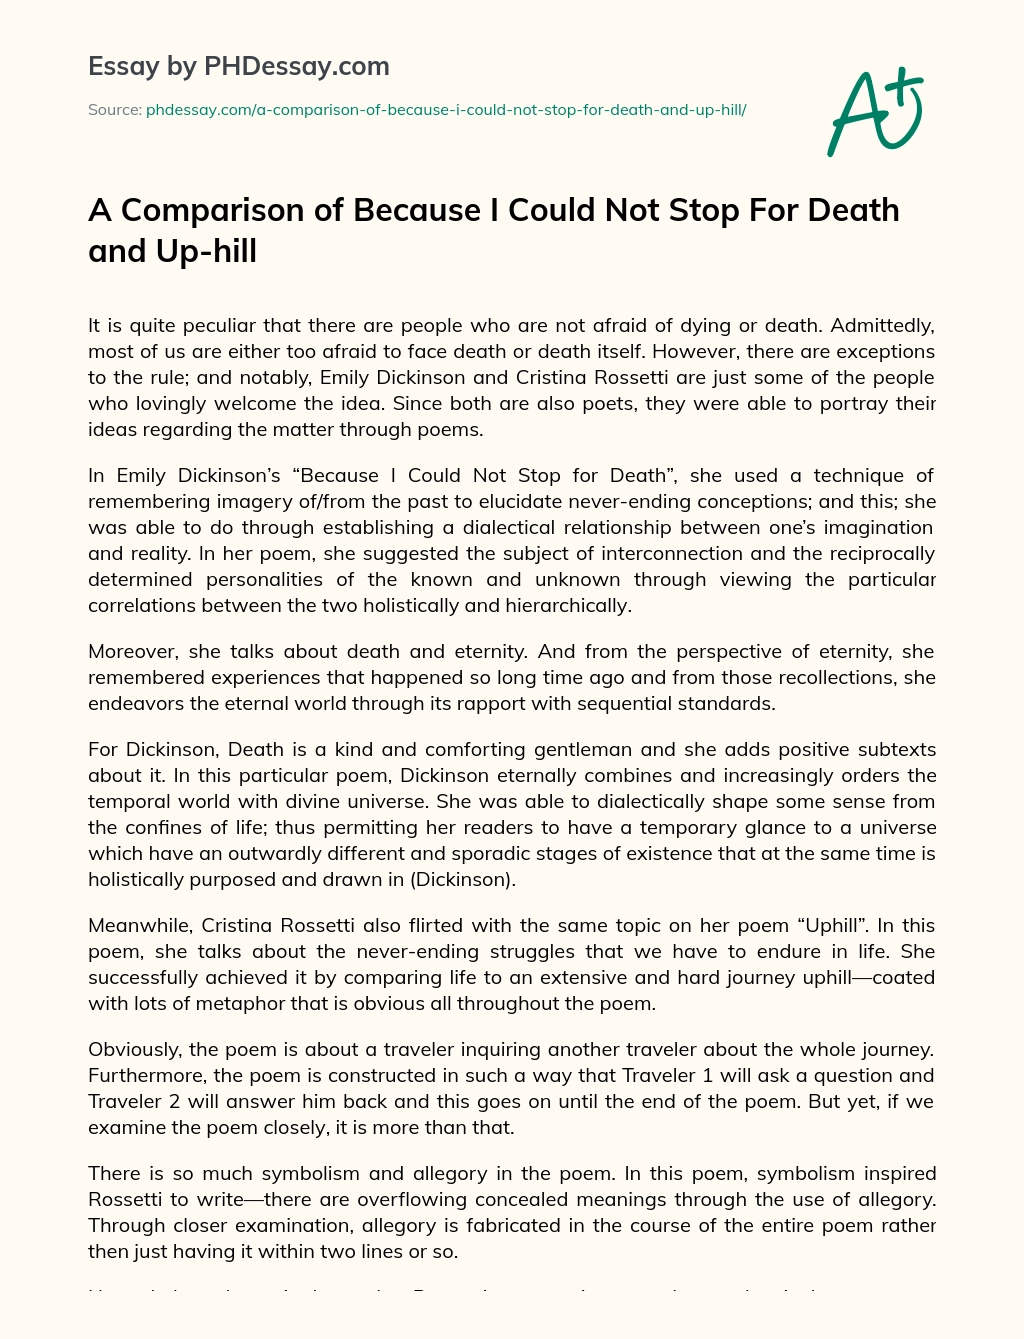 because i could not stop for death essay